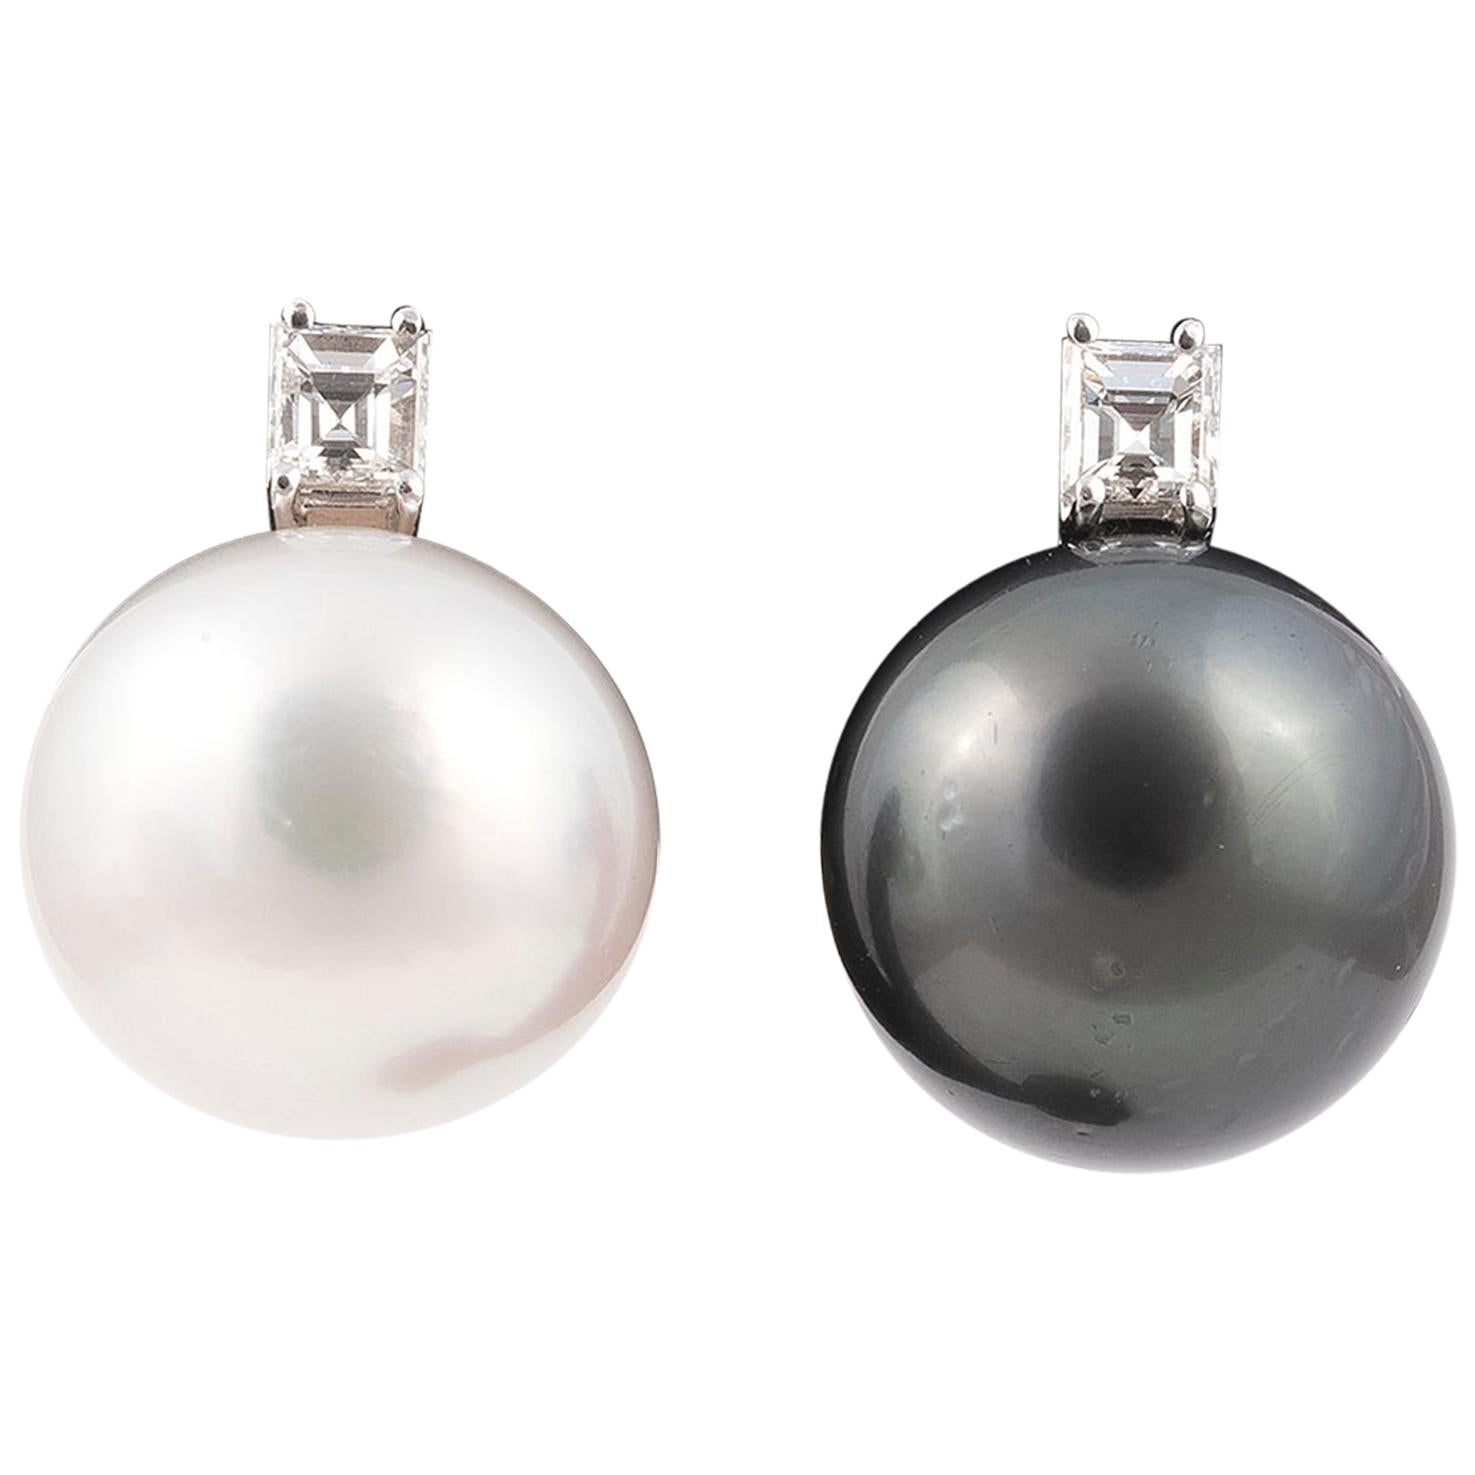 Pair of South Sea Cultured Pearl and Diamond Earrings